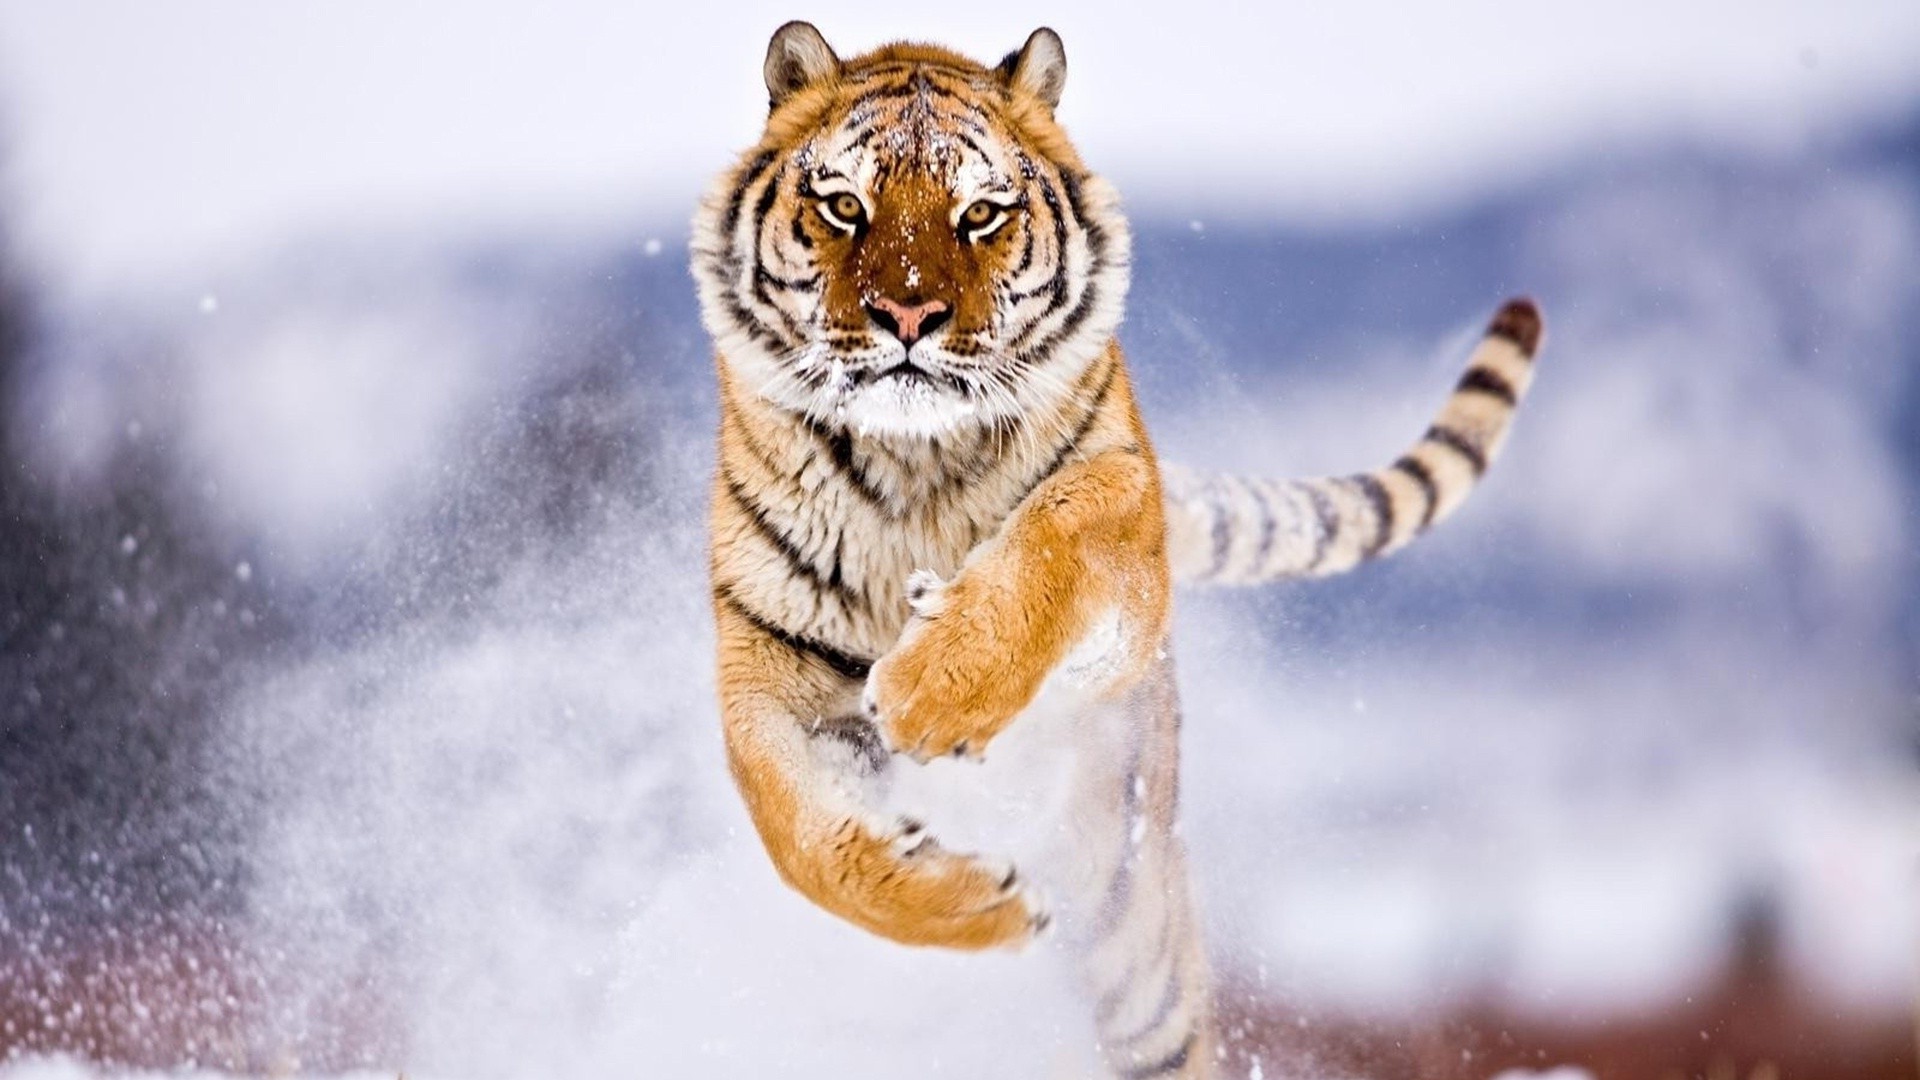 tiger, Snow, Attack, Animals Wallpapers HD / Desktop and Mobile Backgrounds